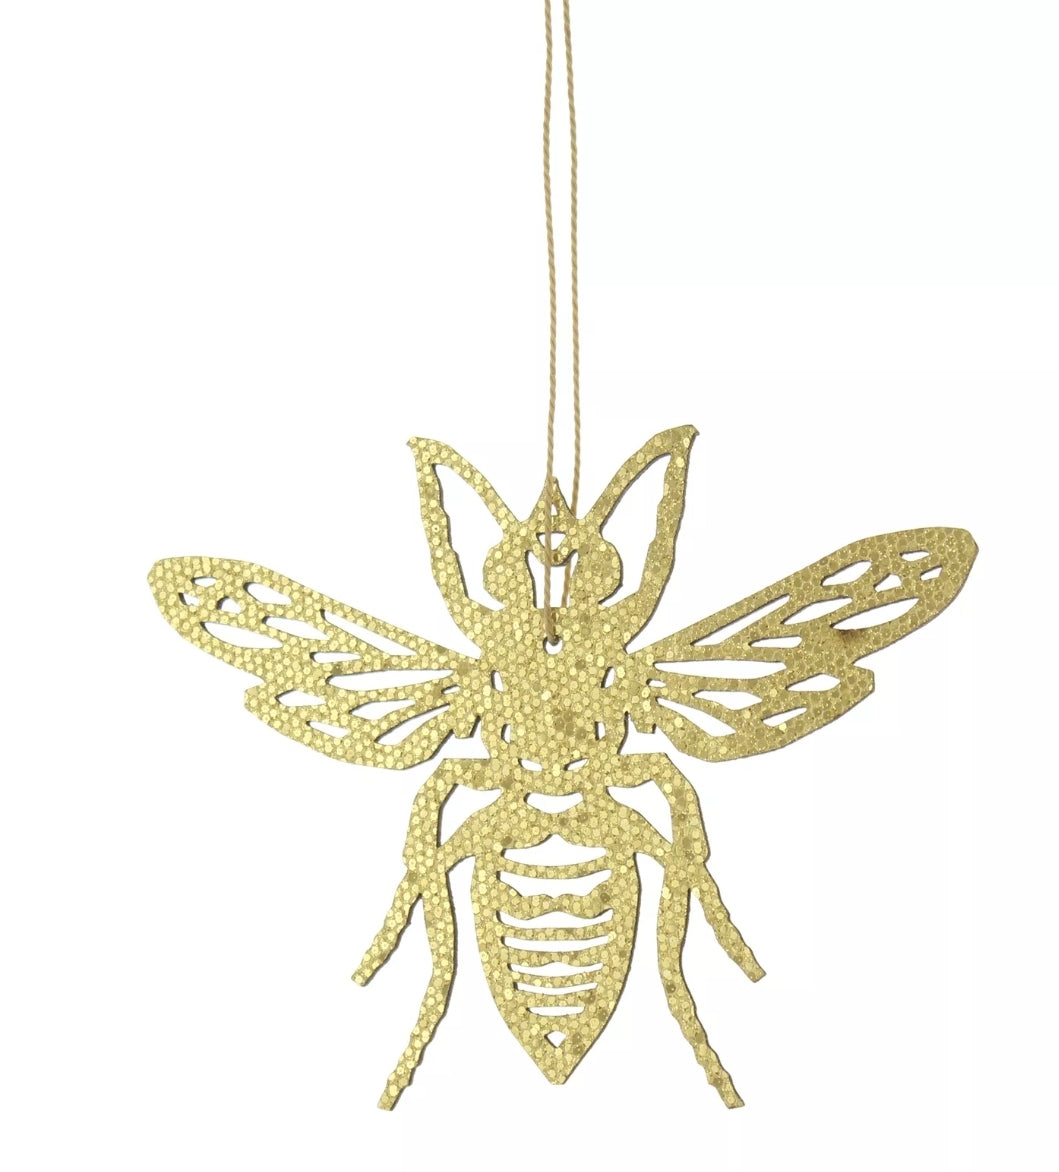 Lovely couple of the Gold Bee Hanging Decoration 12 cm Laser Cut. 2 pieces. Home decor item and gift idea.      Glitter fantasy     Royal Animal design     Gift Summer/Xmas decorations     Garden accessories     Bee lovers collection